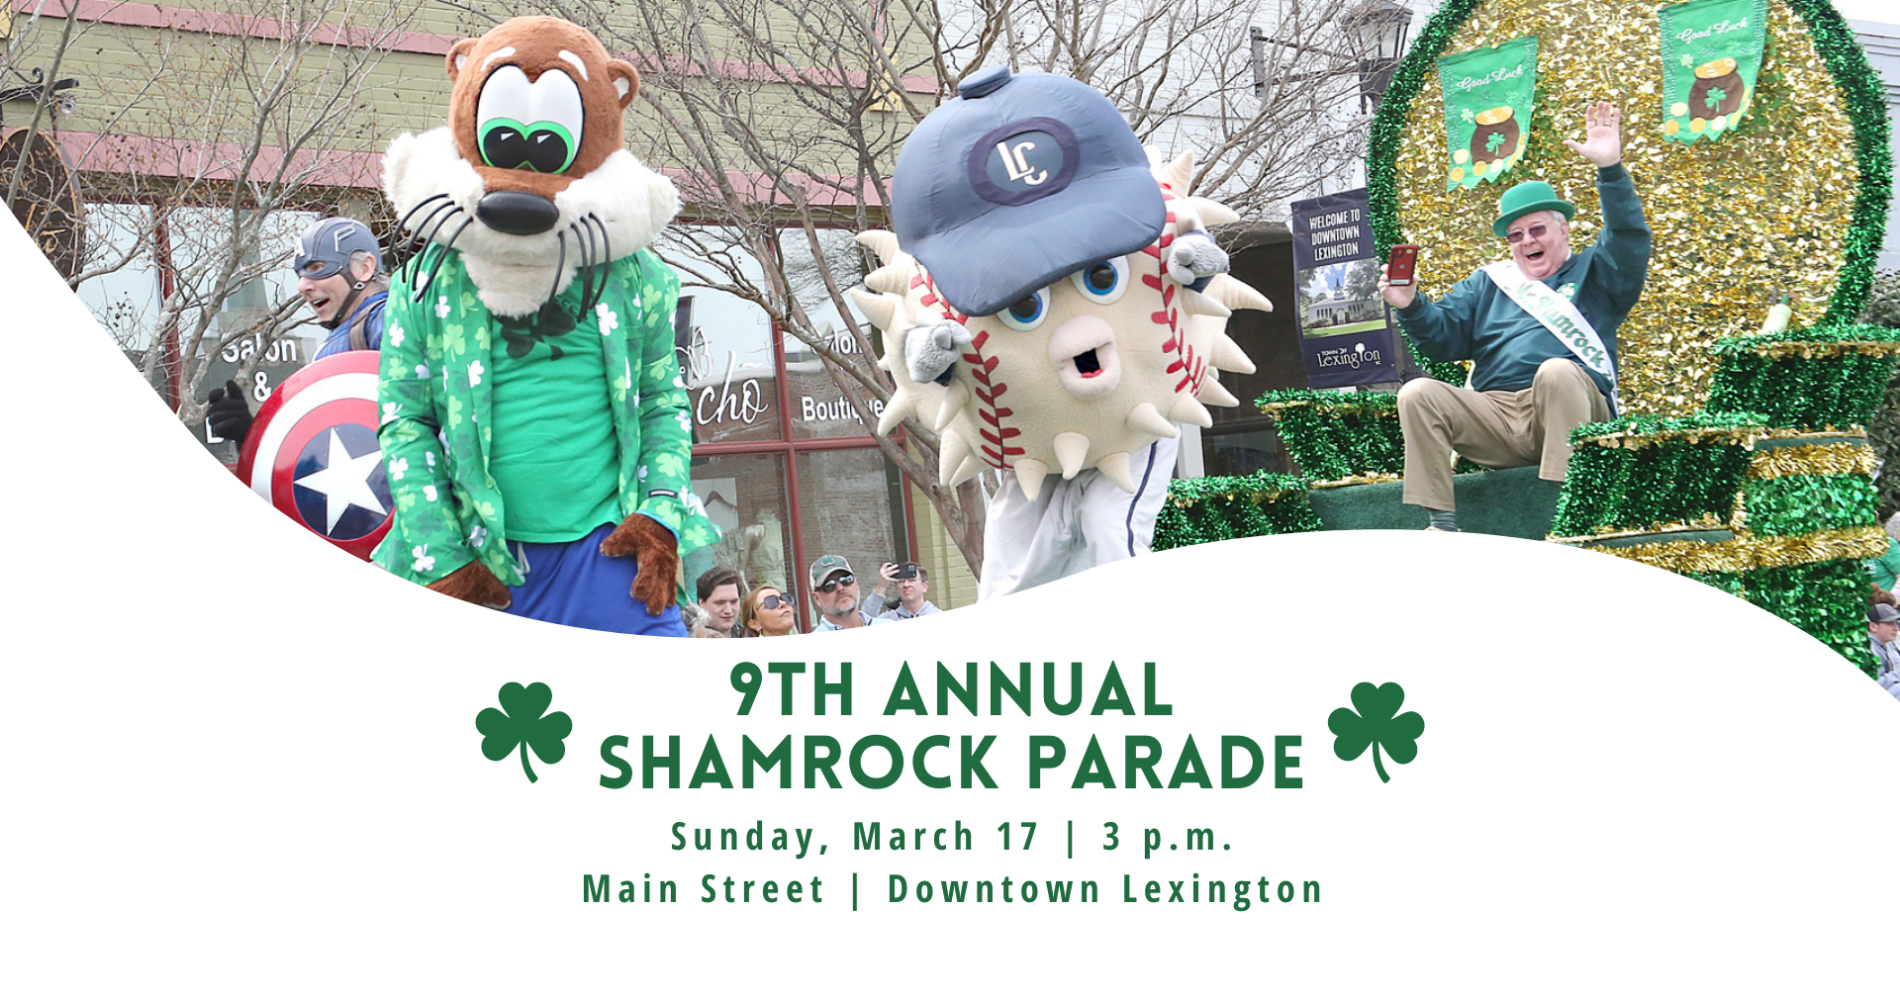 New Date For Shamrock Parade!